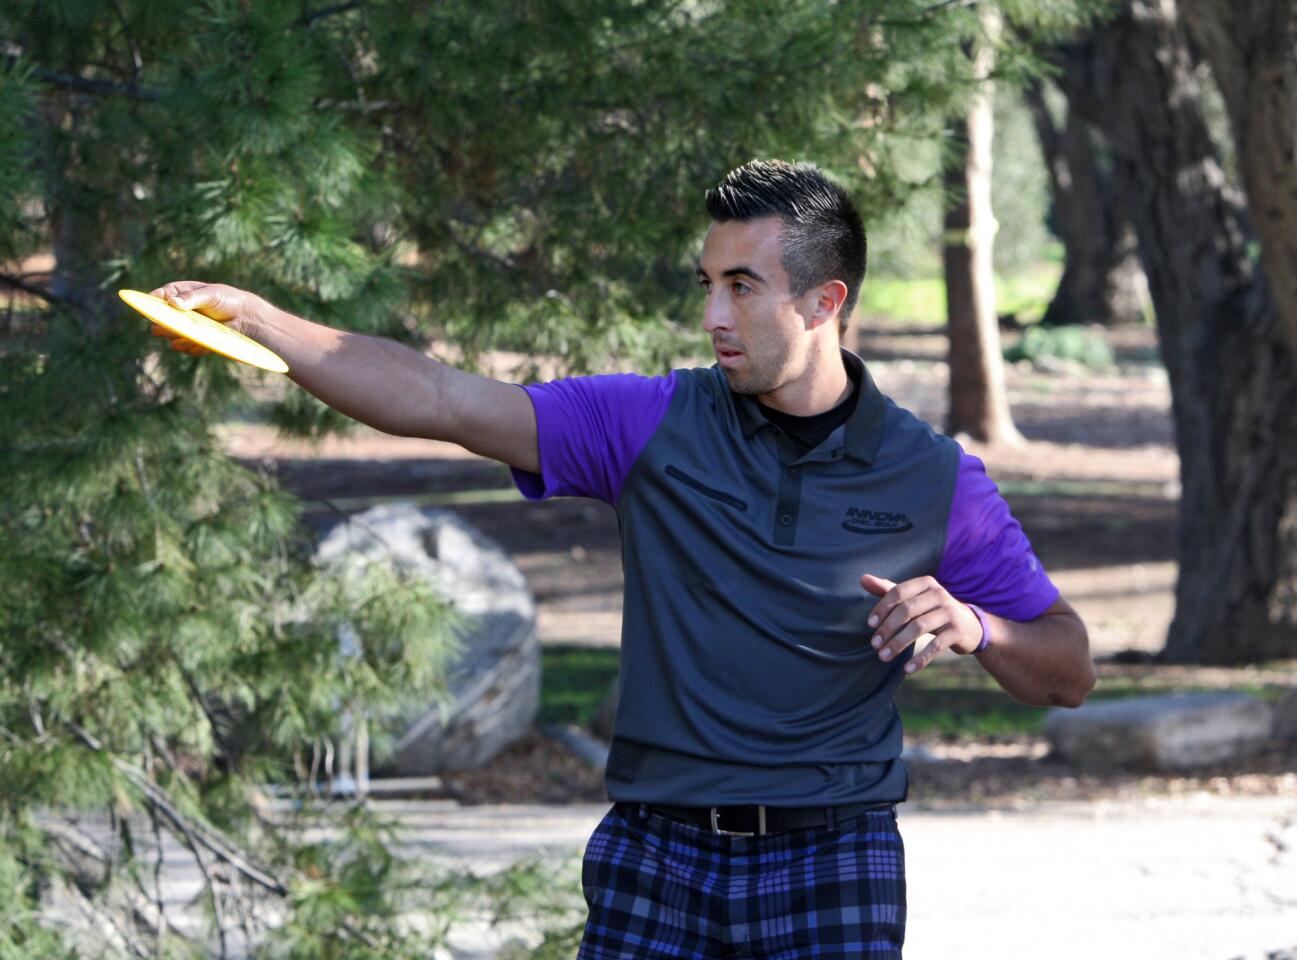 Four-time consecutive world disc golf champion Paul McBeth prepares to take his first throw at the 38th Annual Professional Disc Golf Assn. Wintertime Open at Hahamongna Watershed Park in Pasadena on Saturday, Feb. 20, 2016.